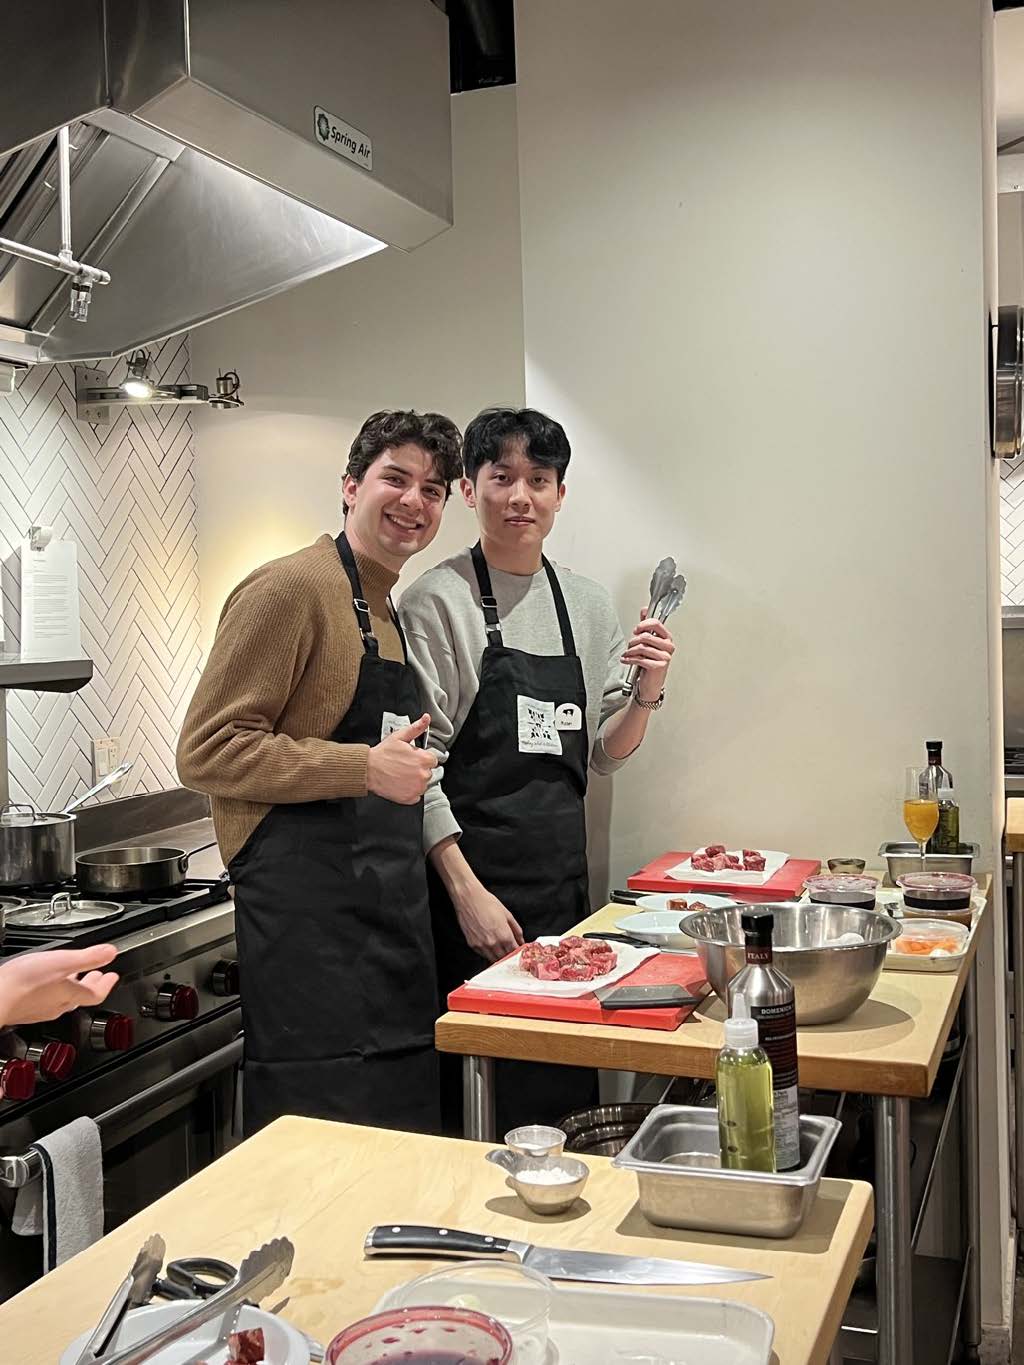 The other intern, Mason, and I at our cooking event at The Dirty Apron